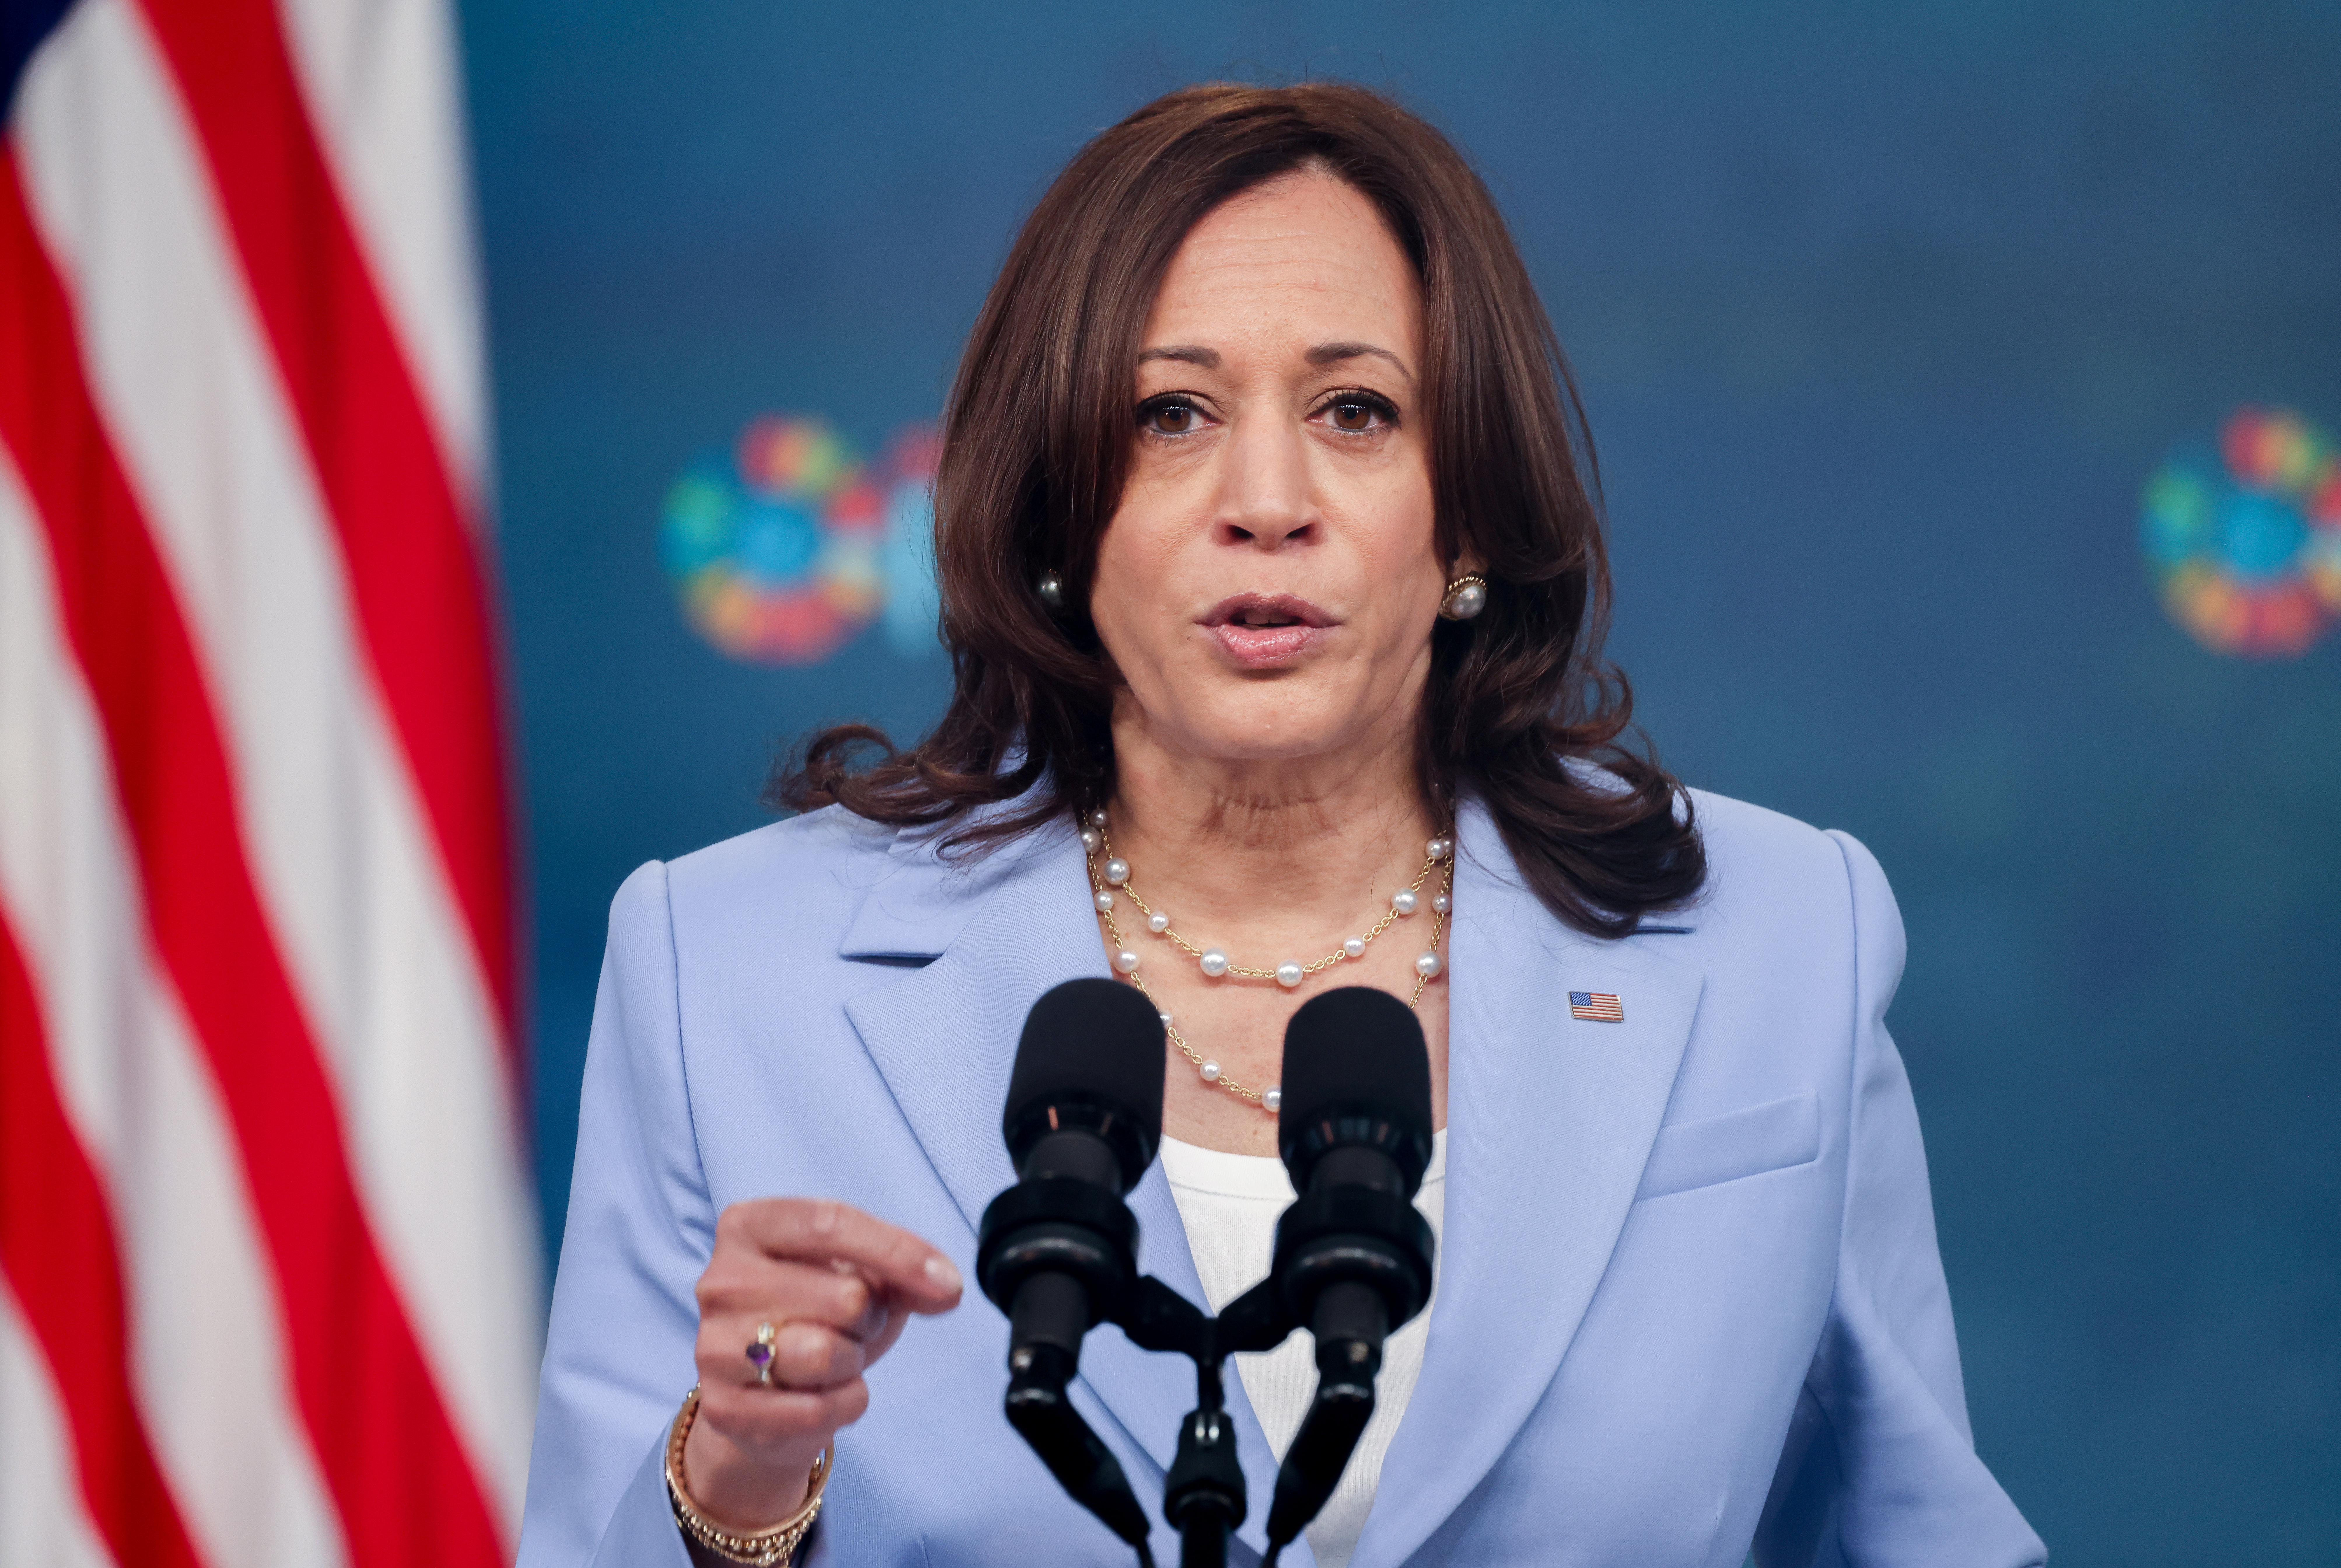 U.S. Vice President Harris gives remarks at the White House during the Generation Equality Forum